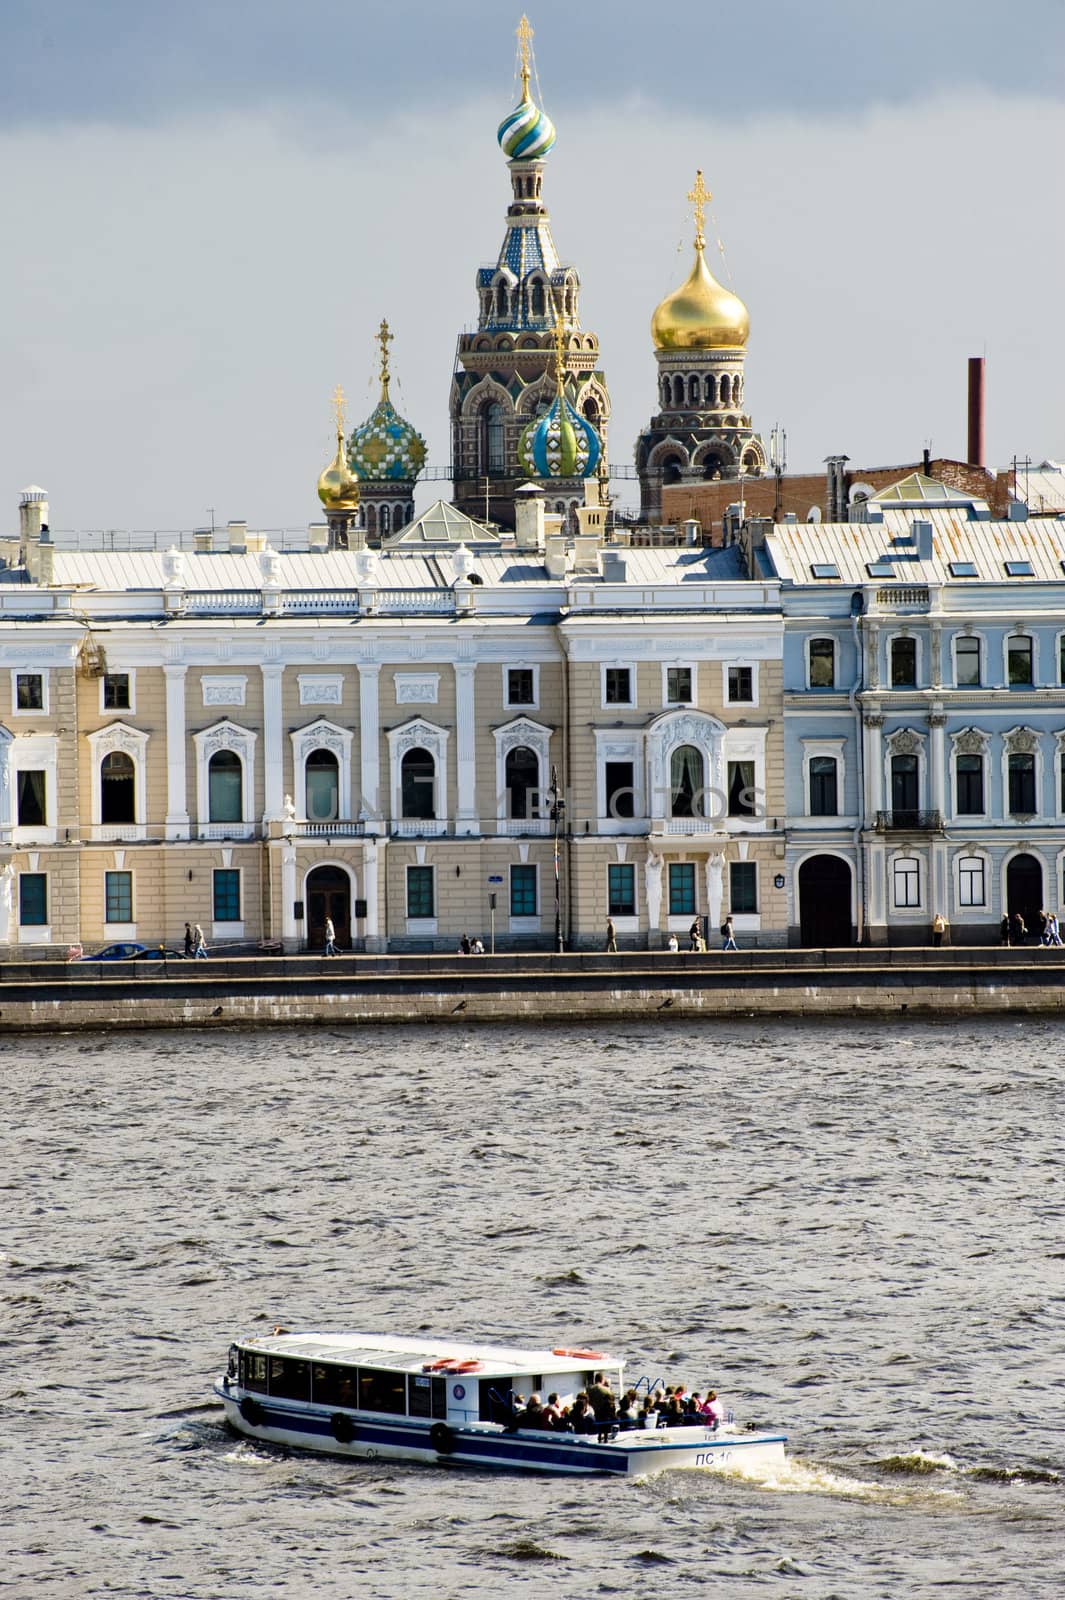 The view on the Neva river in Sankt Petersburd Russia